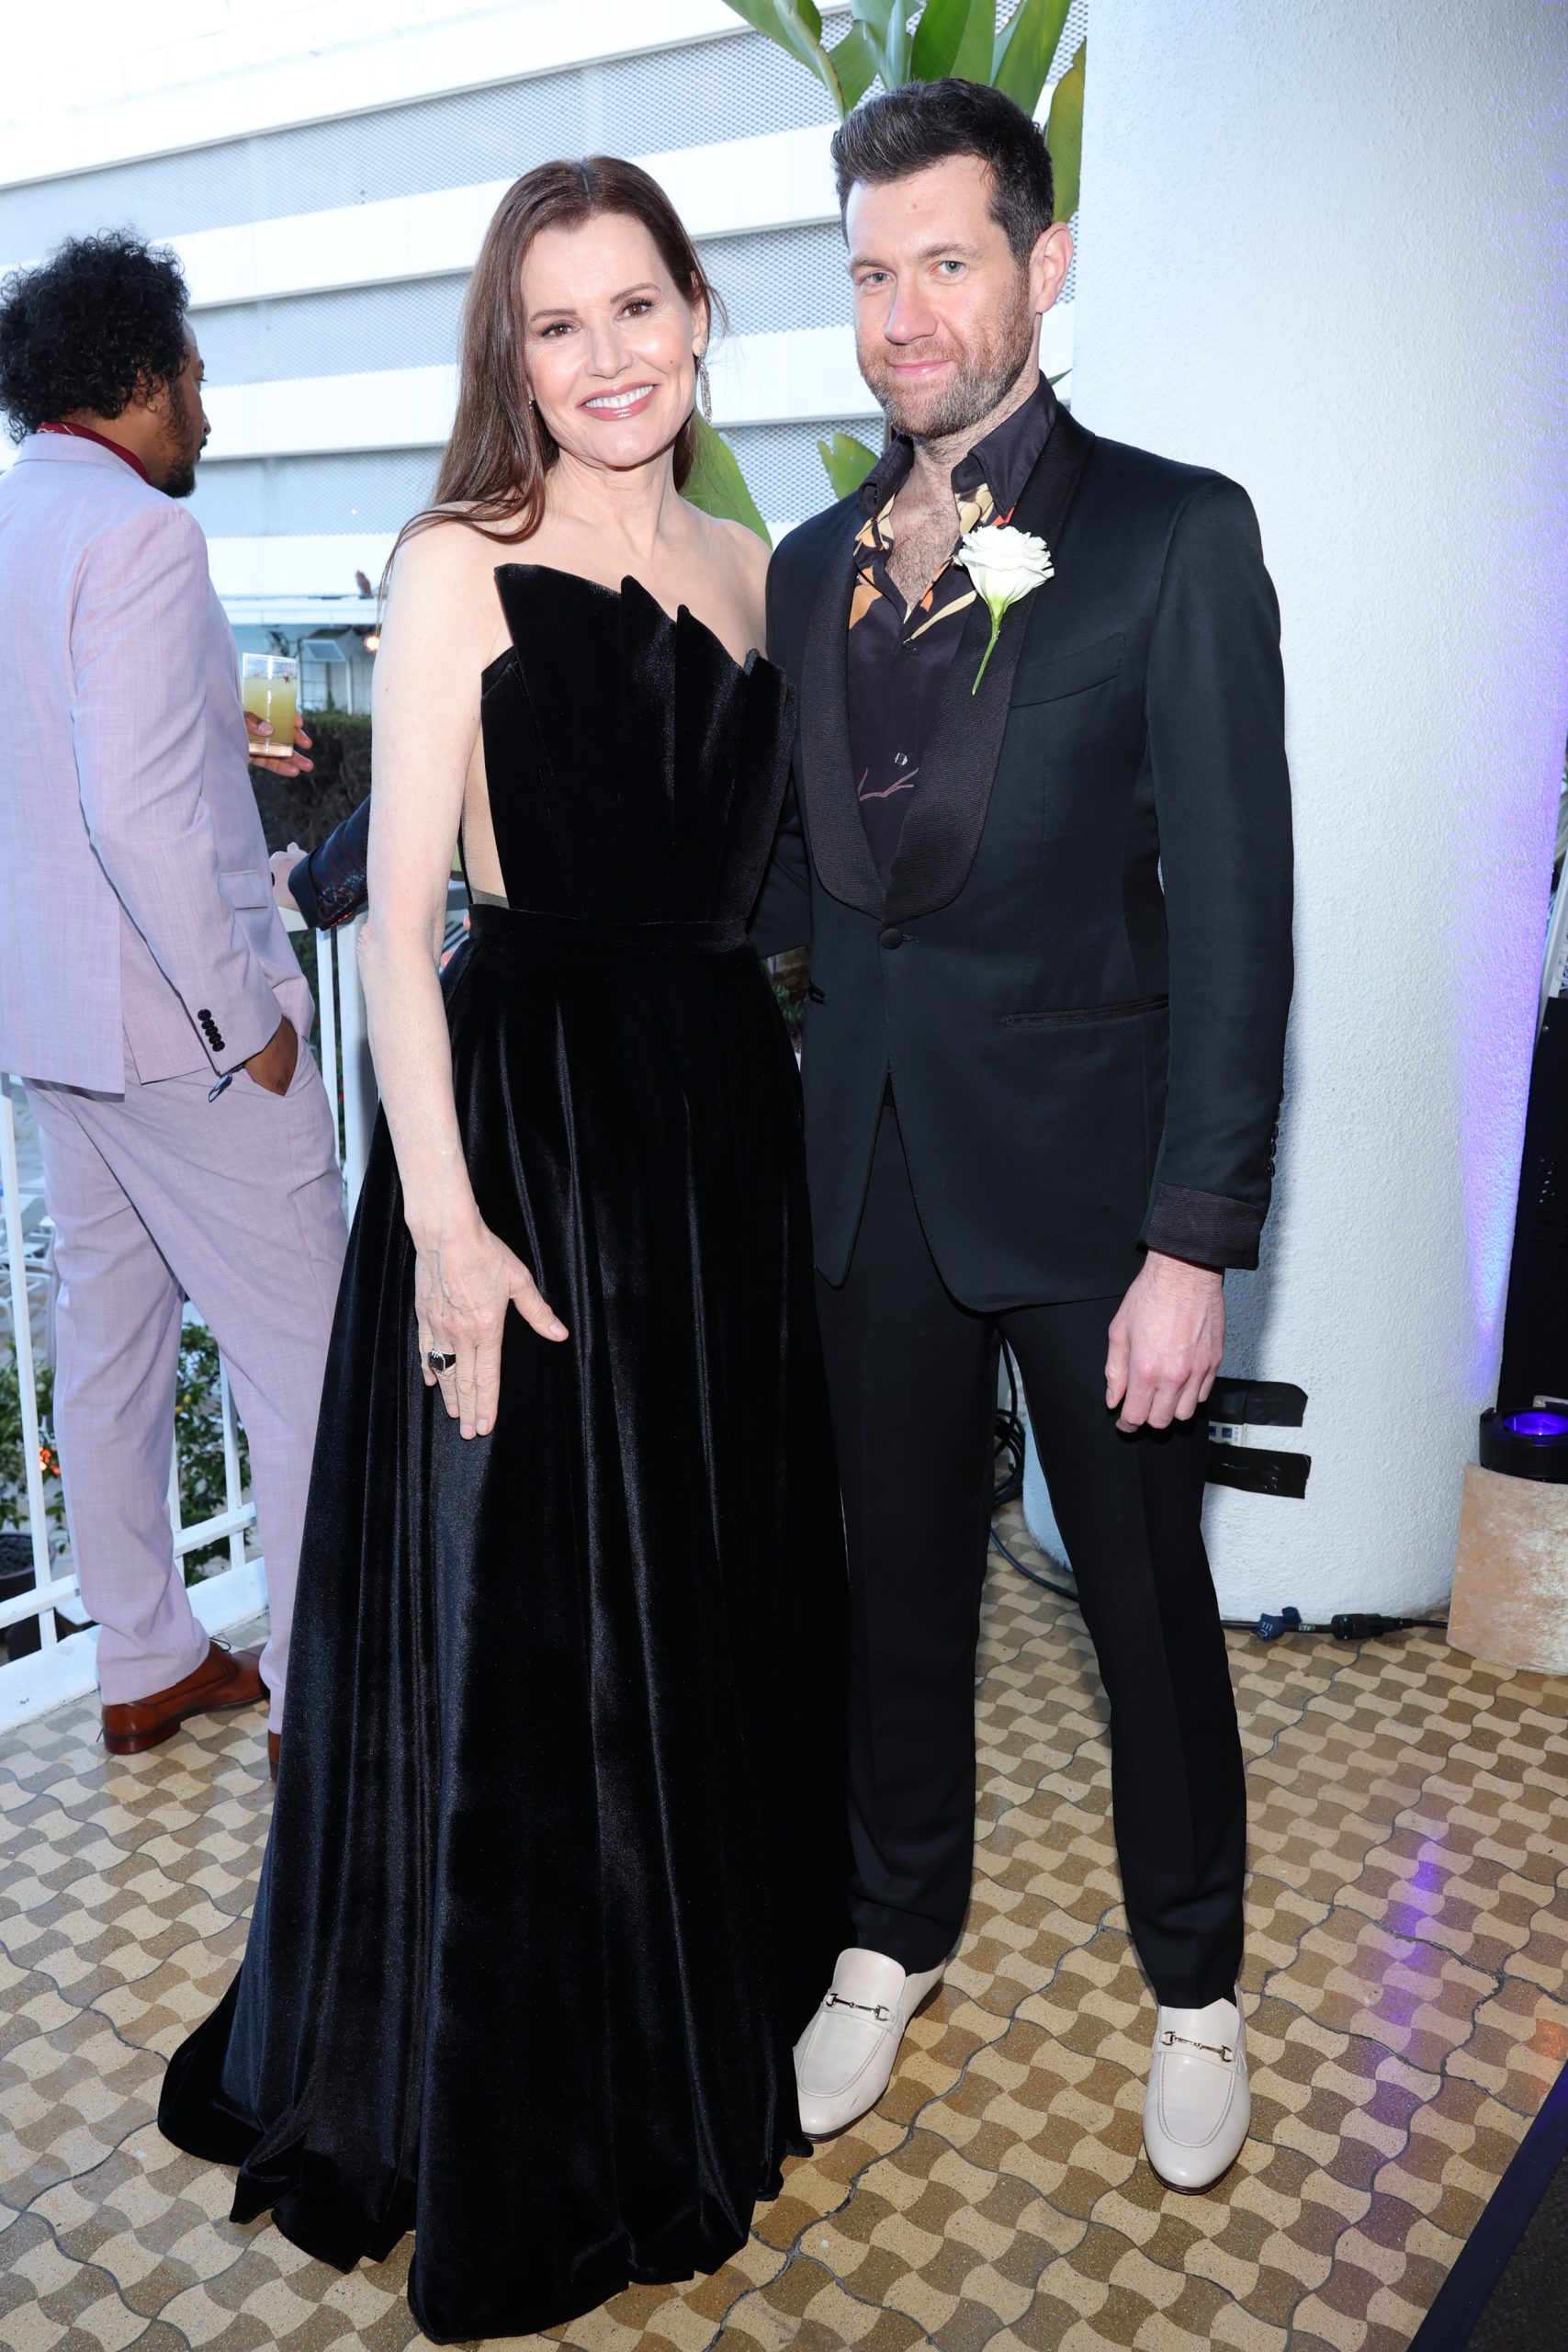 BEVERLY HILLS, CALIFORNIA - MARCH 30: (L-R) Geena Davis and Billy Eichner attend the 34th Annual GLAAD Media Awards Sponsored by Ketel One Family Made Vodka at The Beverly Hilton on March 30, 2023 in Beverly Hills, California. (Photo by Rich Polk/Getty Images for Ketel One)